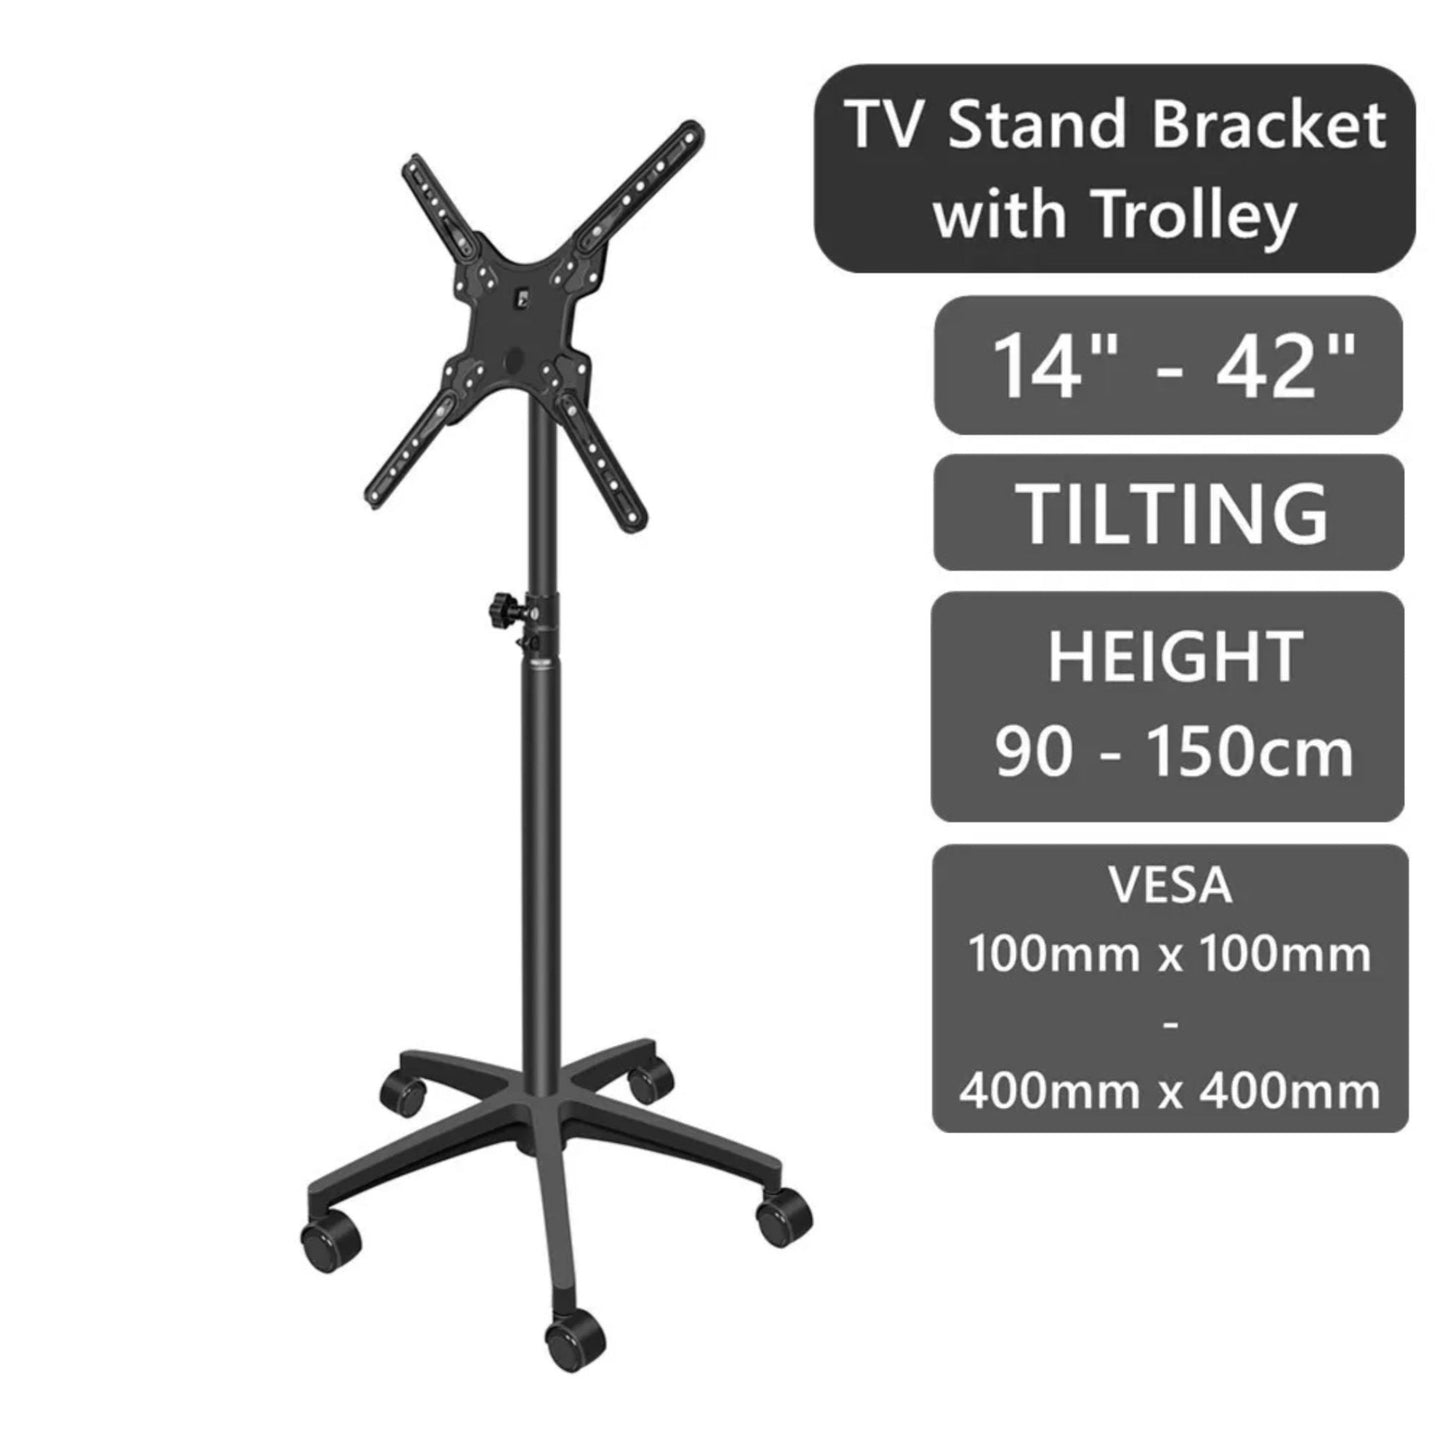 14 to 55 inch LED TV Cart Portable Stand with Wheels, Swivel & Tilt Function| 30 kgs Load Capacity - GADGET WAGON TV Wall & Ceiling Mounts